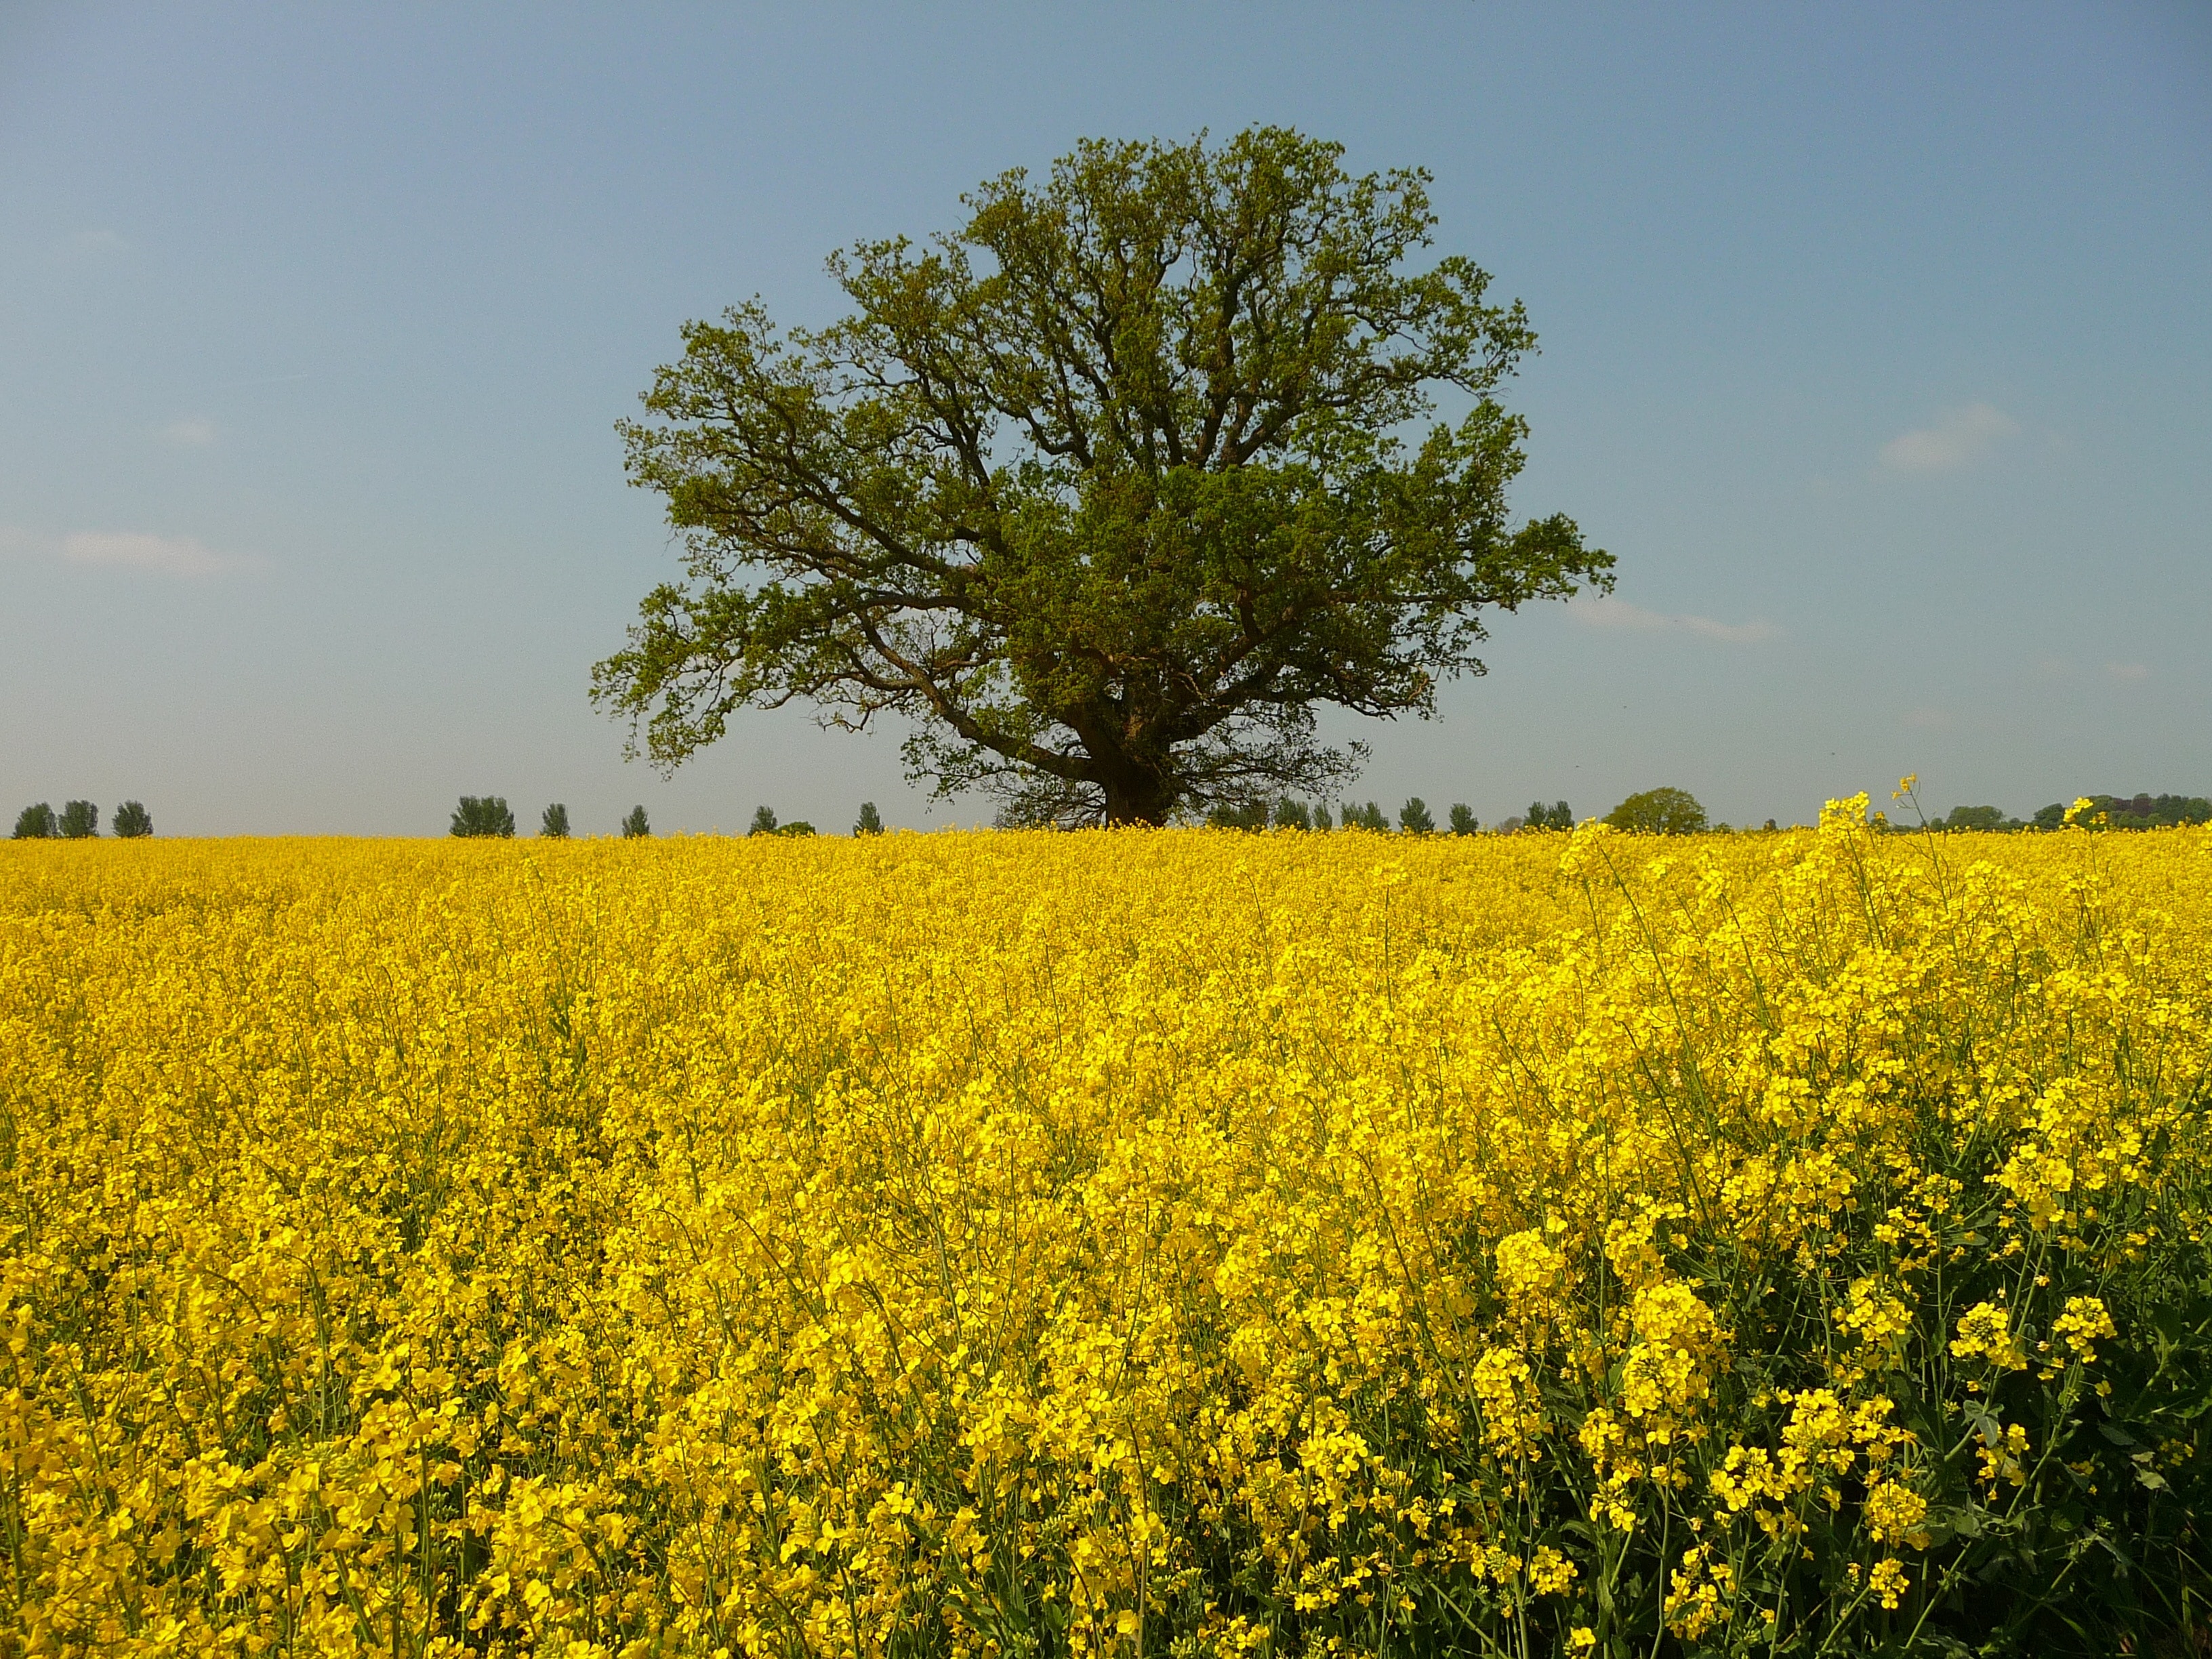 green tree surrounded by yellow petaled flowers during daytime